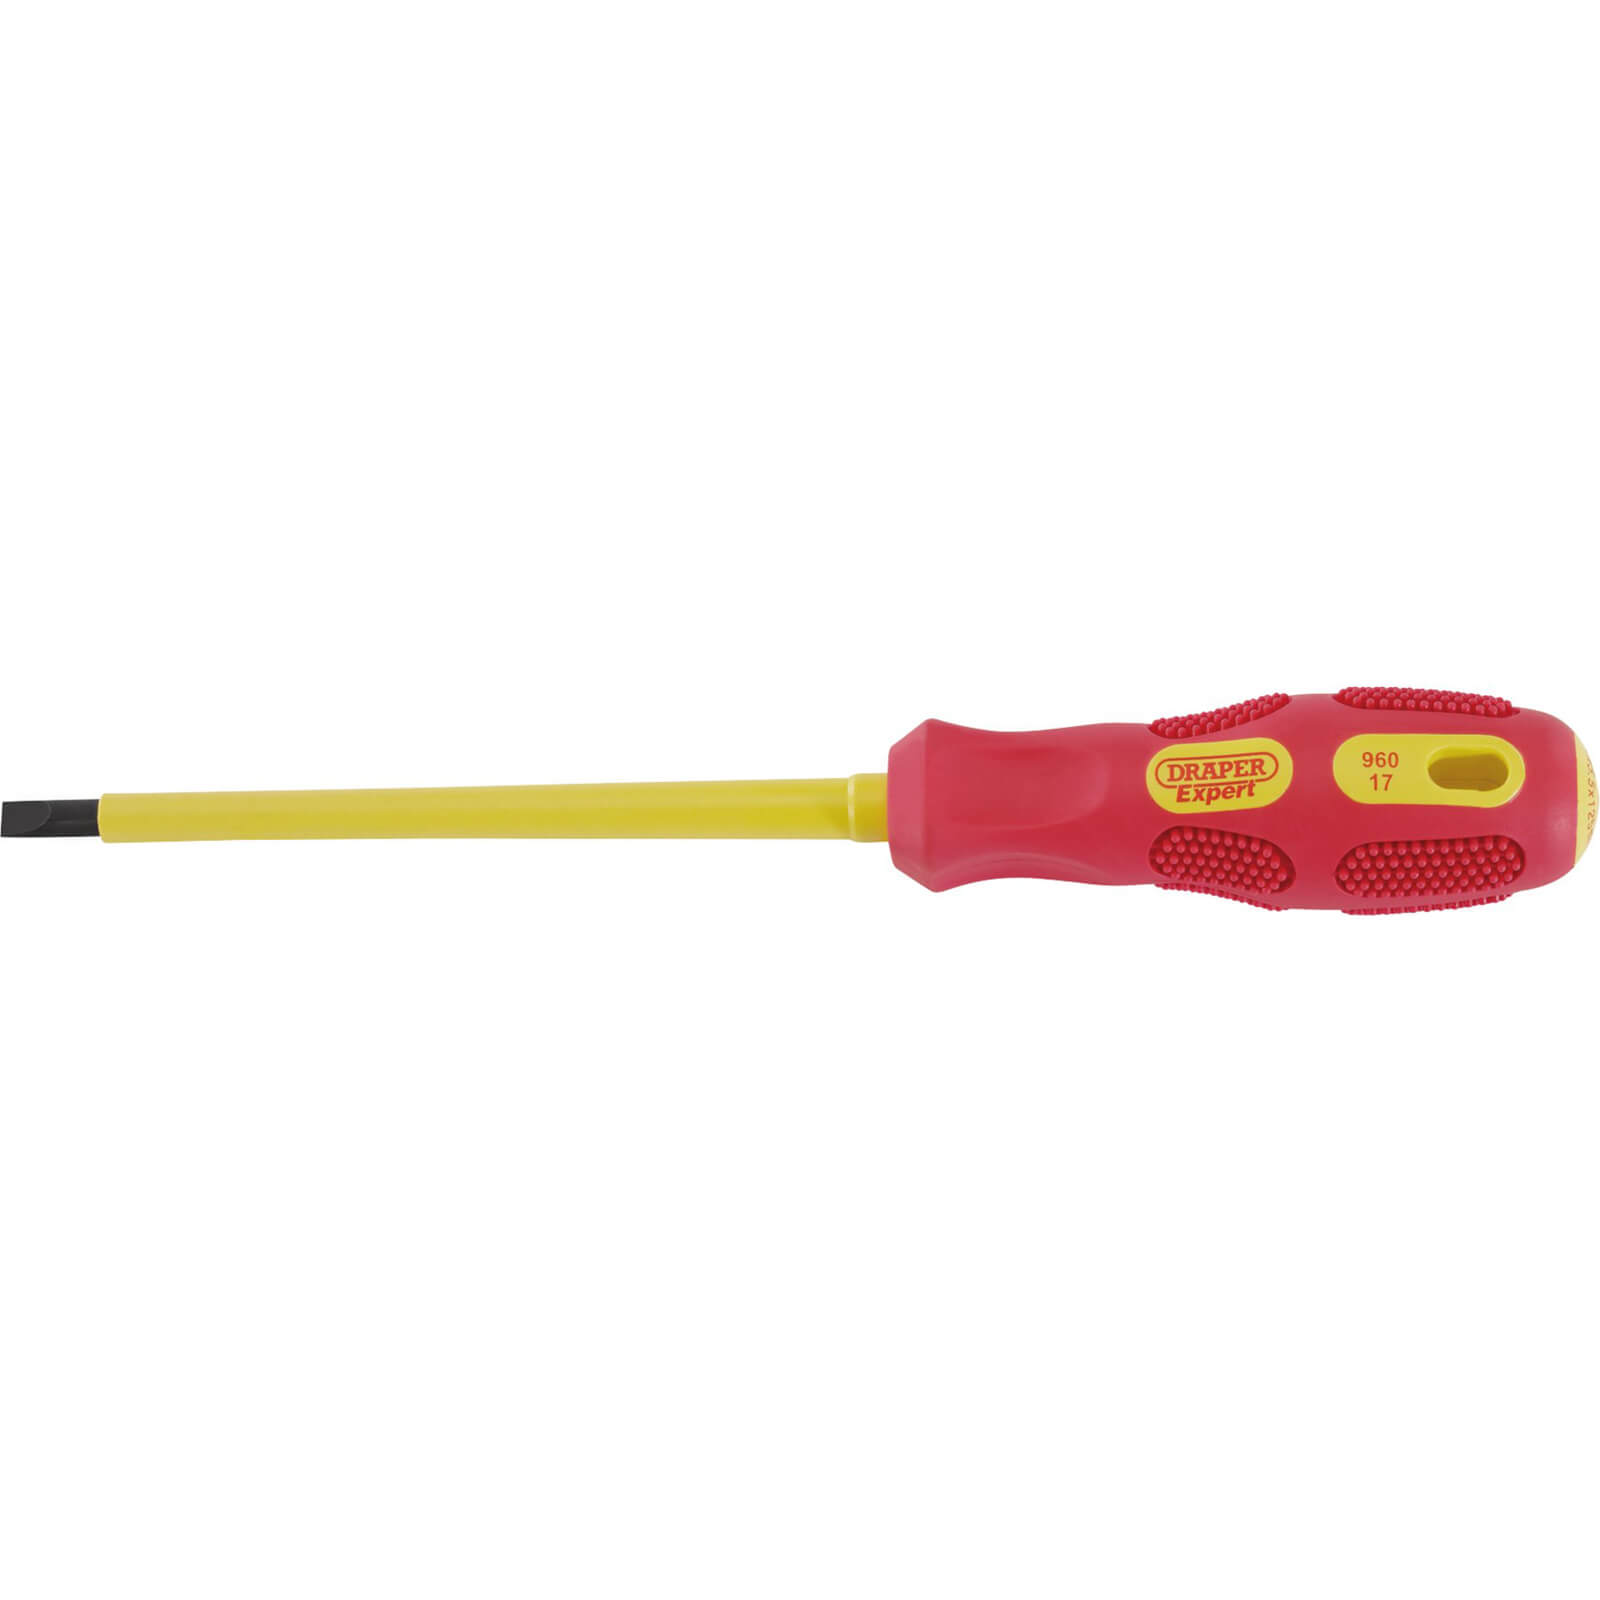 Photo of Draper Expert Vde Insulated Parallel Slotted Screwdriver 5.5mm 125mm